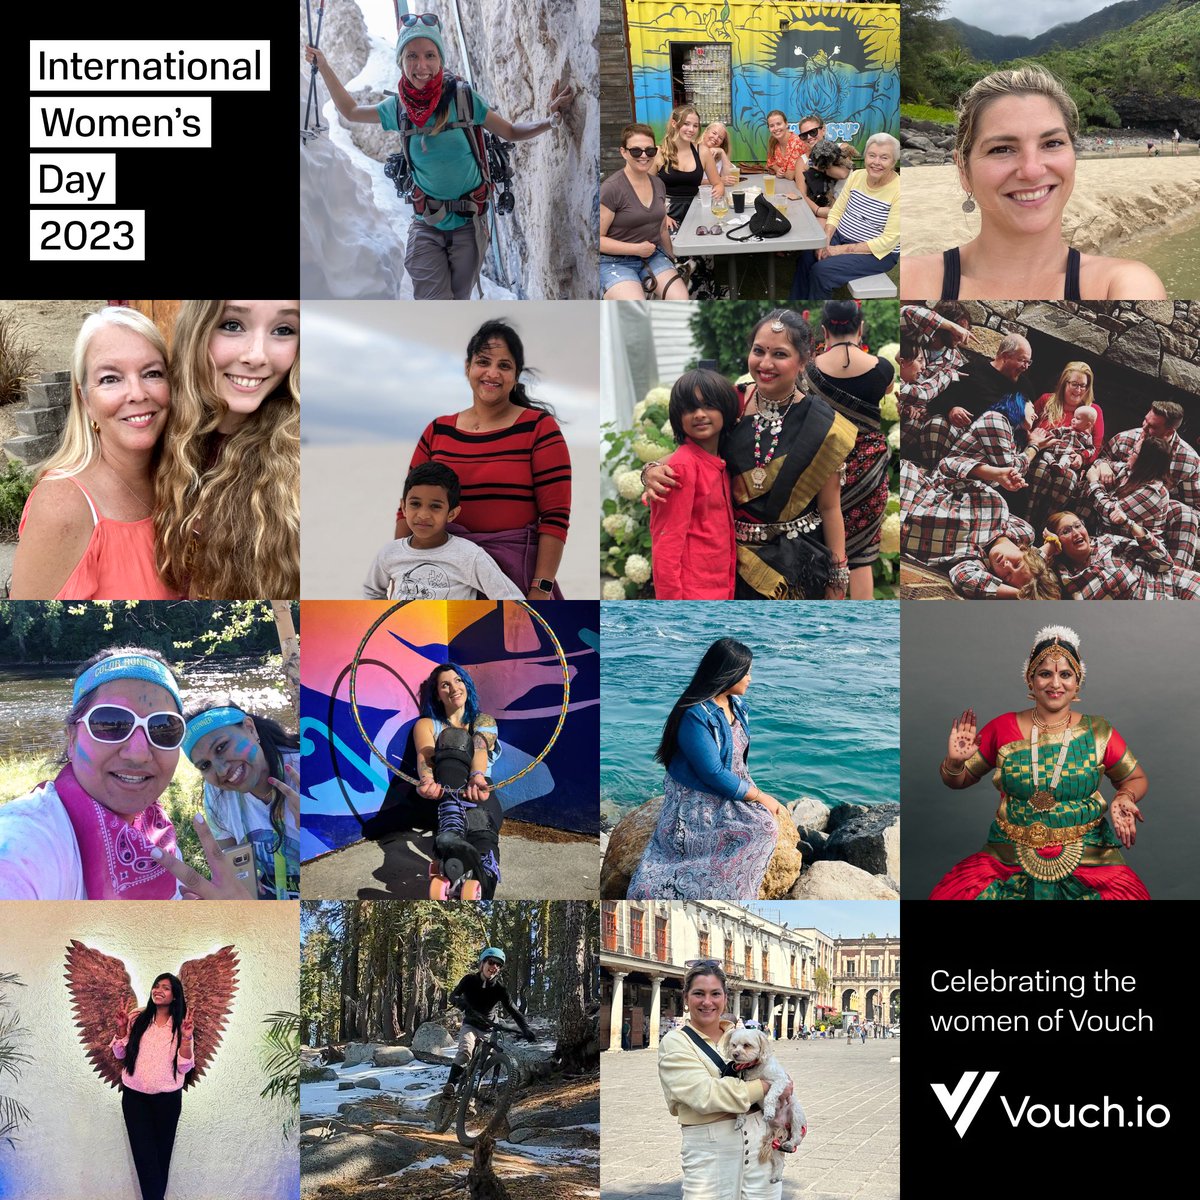 At @vouchio, we're incredibly proud of every member of our team. But today, #InternationalWomensDay, we want to celebrate the women that make us proud. We're proud of our Vouchers who identify as #Women We’re proud we’ve created an #inclusive environment that attracts the best…